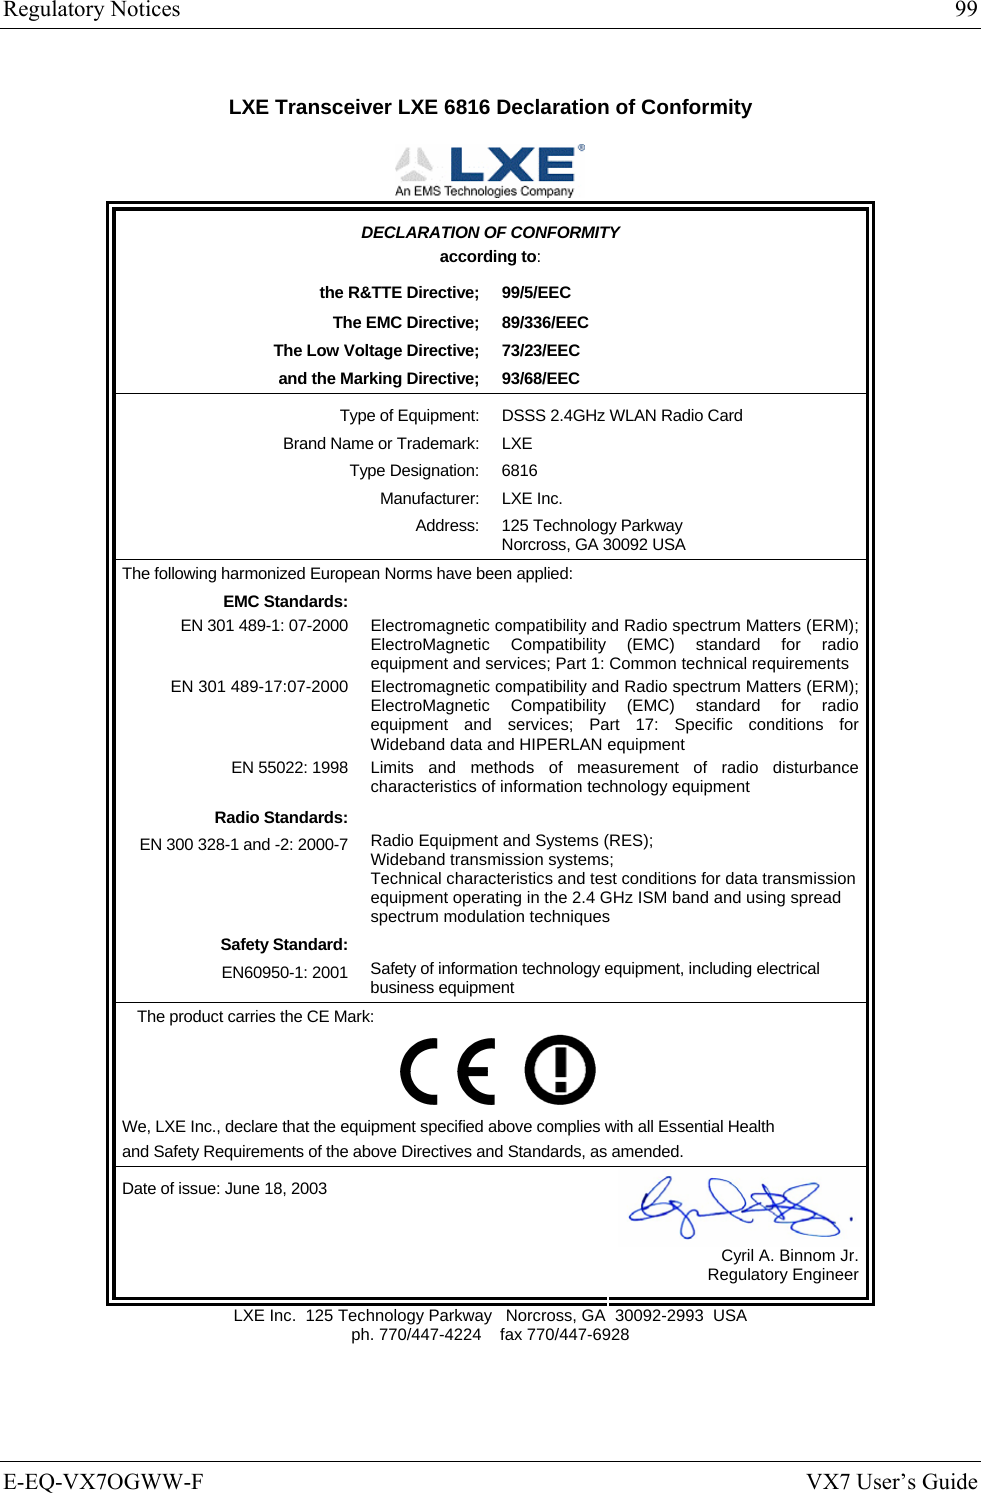 Regulatory Notices  99 E-EQ-VX7OGWW-F  VX7 User’s Guide LXE Transceiver LXE 6816 Declaration of Conformity  DECLARATION OF CONFORMITY according to: the R&amp;TTE Directive;  99/5/EEC The EMC Directive;  89/336/EEC The Low Voltage Directive;  73/23/EEC and the Marking Directive;  93/68/EEC Type of Equipment:  DSSS 2.4GHz WLAN Radio Card Brand Name or Trademark:  LXE Type Designation:  6816 Manufacturer: LXE Inc. Address:  125 Technology Parkway Norcross, GA 30092 USA The following harmonized European Norms have been applied:   EMC Standards:  EN 301 489-1: 07-2000  Electromagnetic compatibility and Radio spectrum Matters (ERM); ElectroMagnetic Compatibility (EMC) standard for radio equipment and services; Part 1: Common technical requirements EN 301 489-17:07-2000  Electromagnetic compatibility and Radio spectrum Matters (ERM); ElectroMagnetic Compatibility (EMC) standard for radio equipment and services; Part 17: Specific conditions for Wideband data and HIPERLAN equipment EN 55022: 1998 Limits and methods of measurement of radio disturbance characteristics of information technology equipment Radio Standards:  EN 300 328-1 and -2: 2000-7 Radio Equipment and Systems (RES); Wideband transmission systems; Technical characteristics and test conditions for data transmission equipment operating in the 2.4 GHz ISM band and using spread spectrum modulation techniques Safety Standard:  EN60950-1: 2001 Safety of information technology equipment, including electrical business equipment The product carries the CE Mark:         We, LXE Inc., declare that the equipment specified above complies with all Essential Health  and Safety Requirements of the above Directives and Standards, as amended. Date of issue: June 18, 2003  Cyril A. Binnom Jr. Regulatory Engineer LXE Inc.  125 Technology Parkway   Norcross, GA  30092-2993  USA ph. 770/447-4224    fax 770/447-6928 